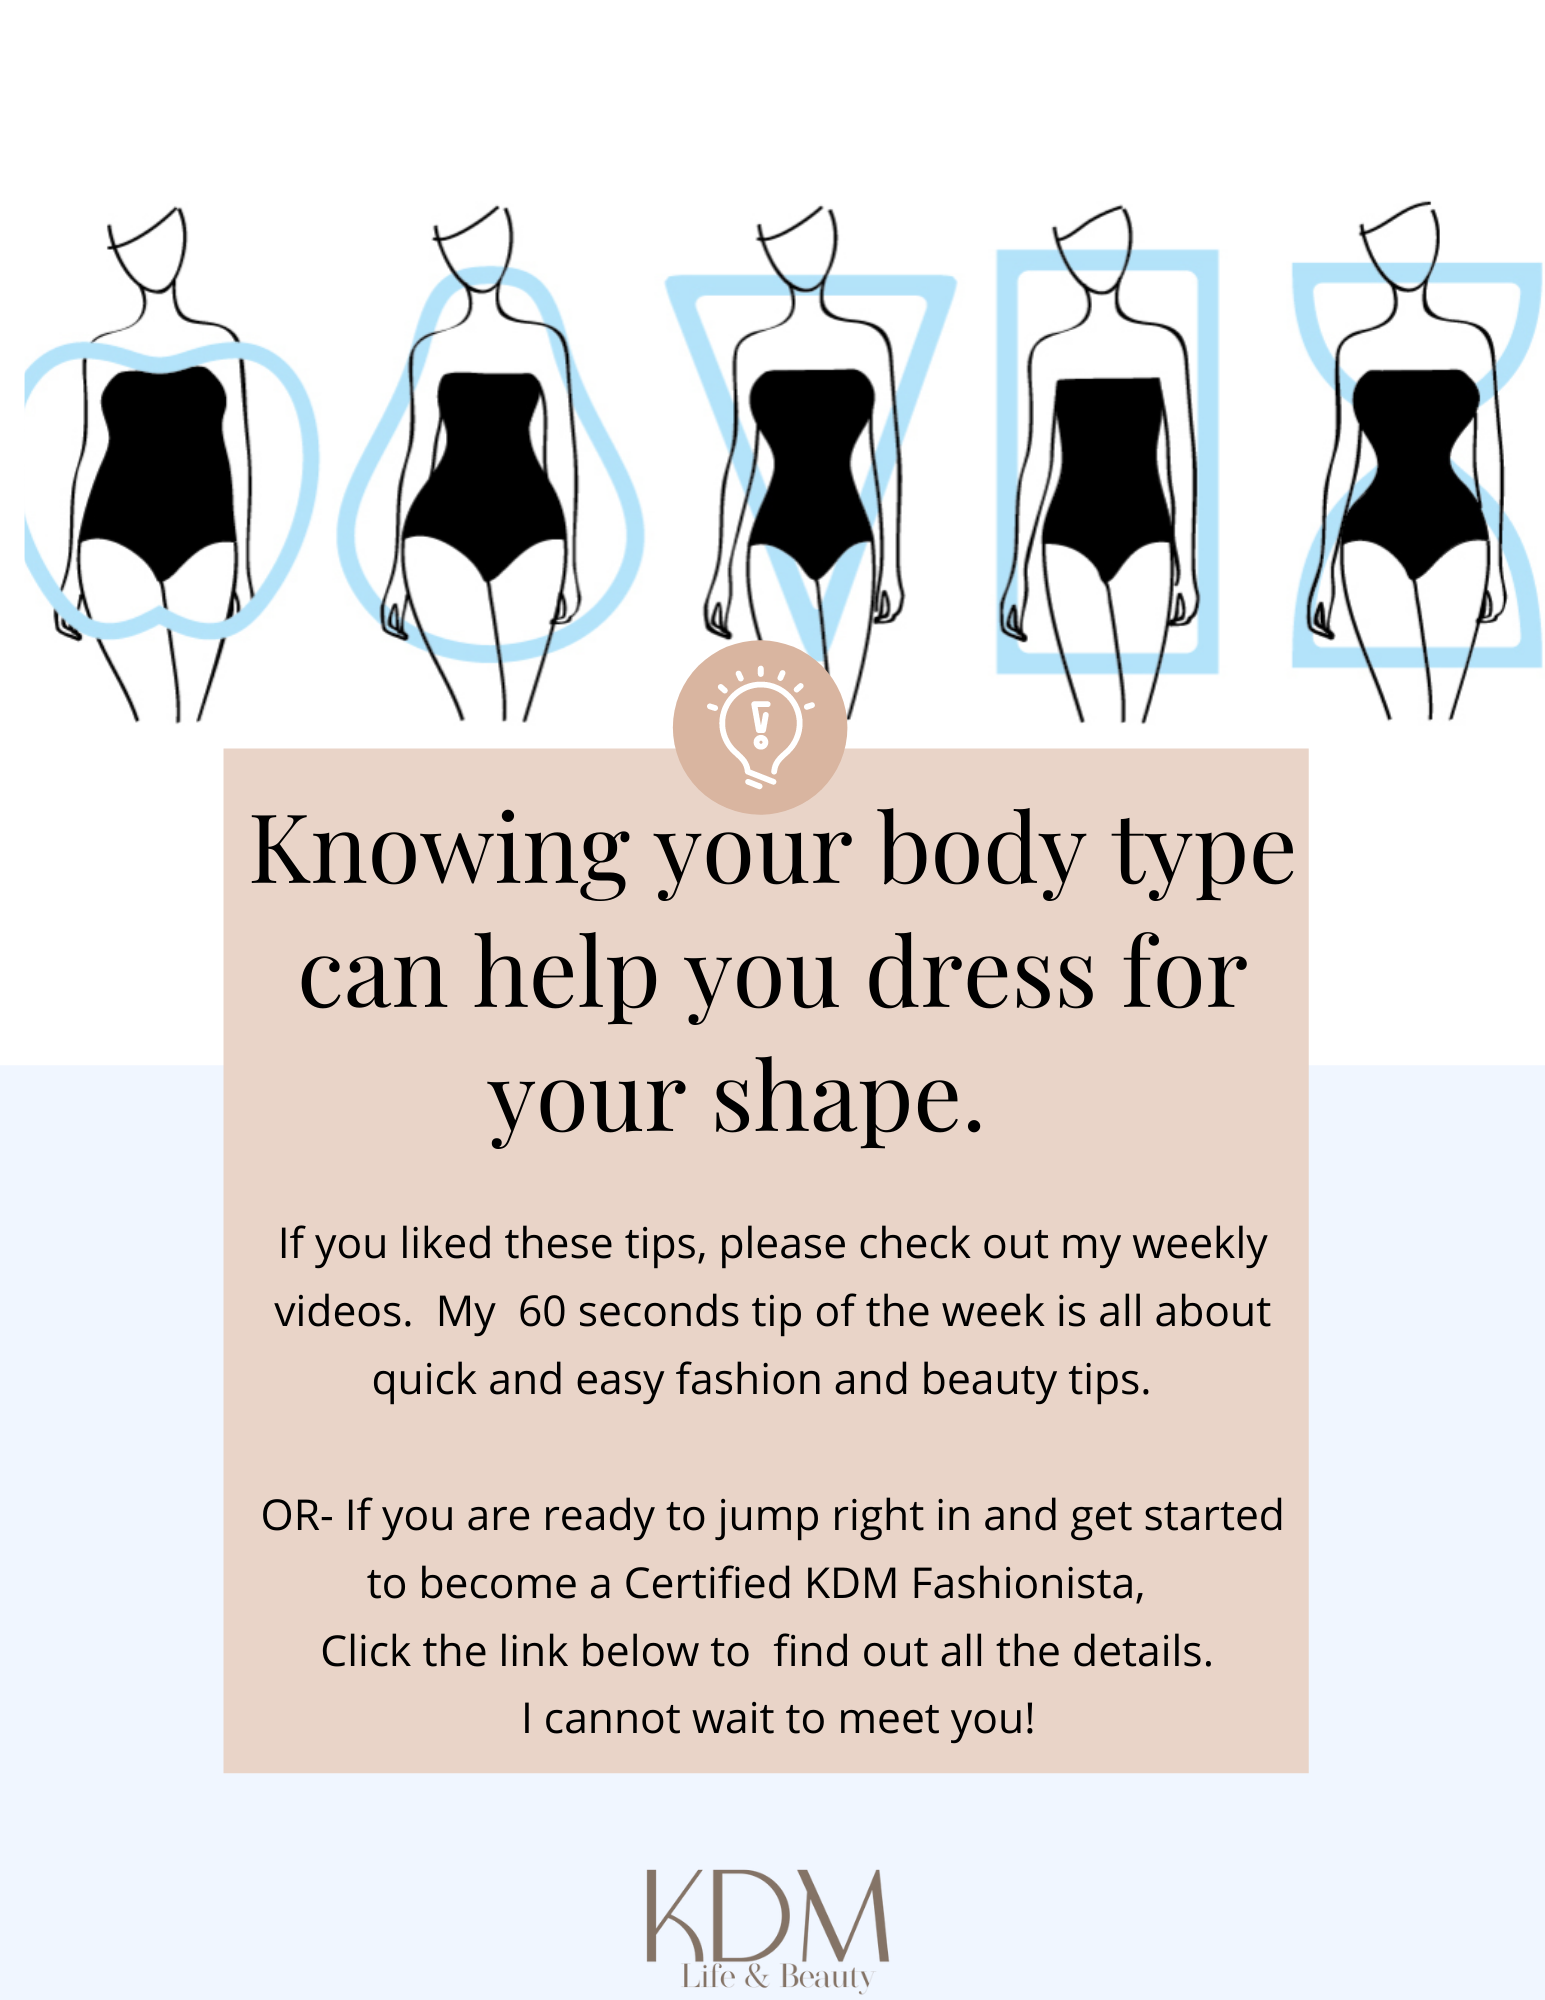 Three Common Mistakes of Dressing For Your Body Type